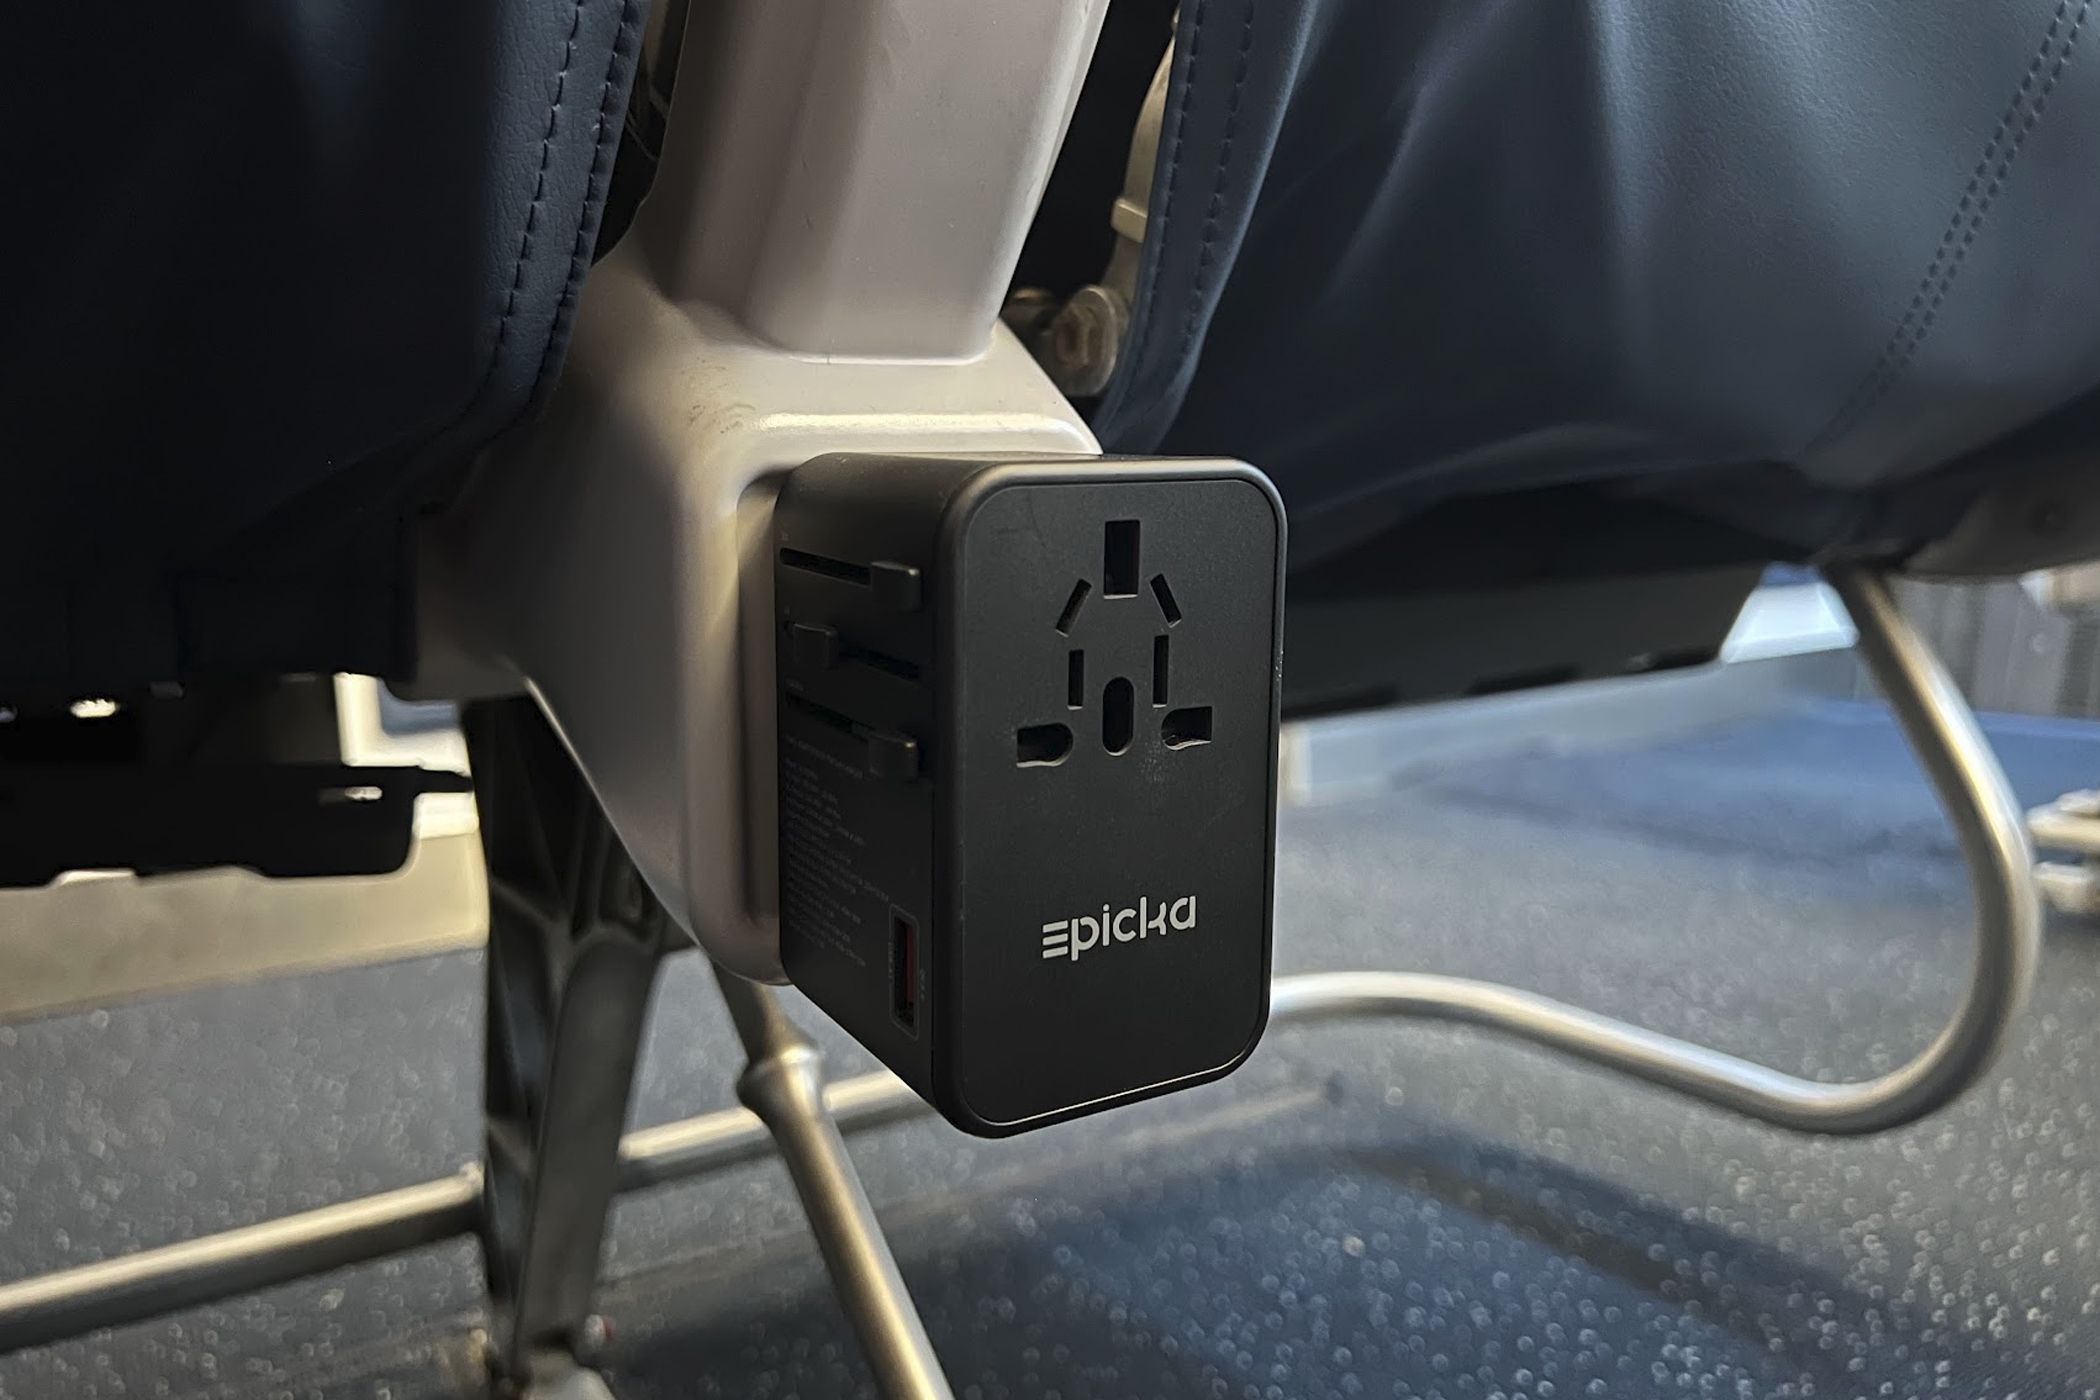 An international power adapter plugged into a Delta Airlines plane